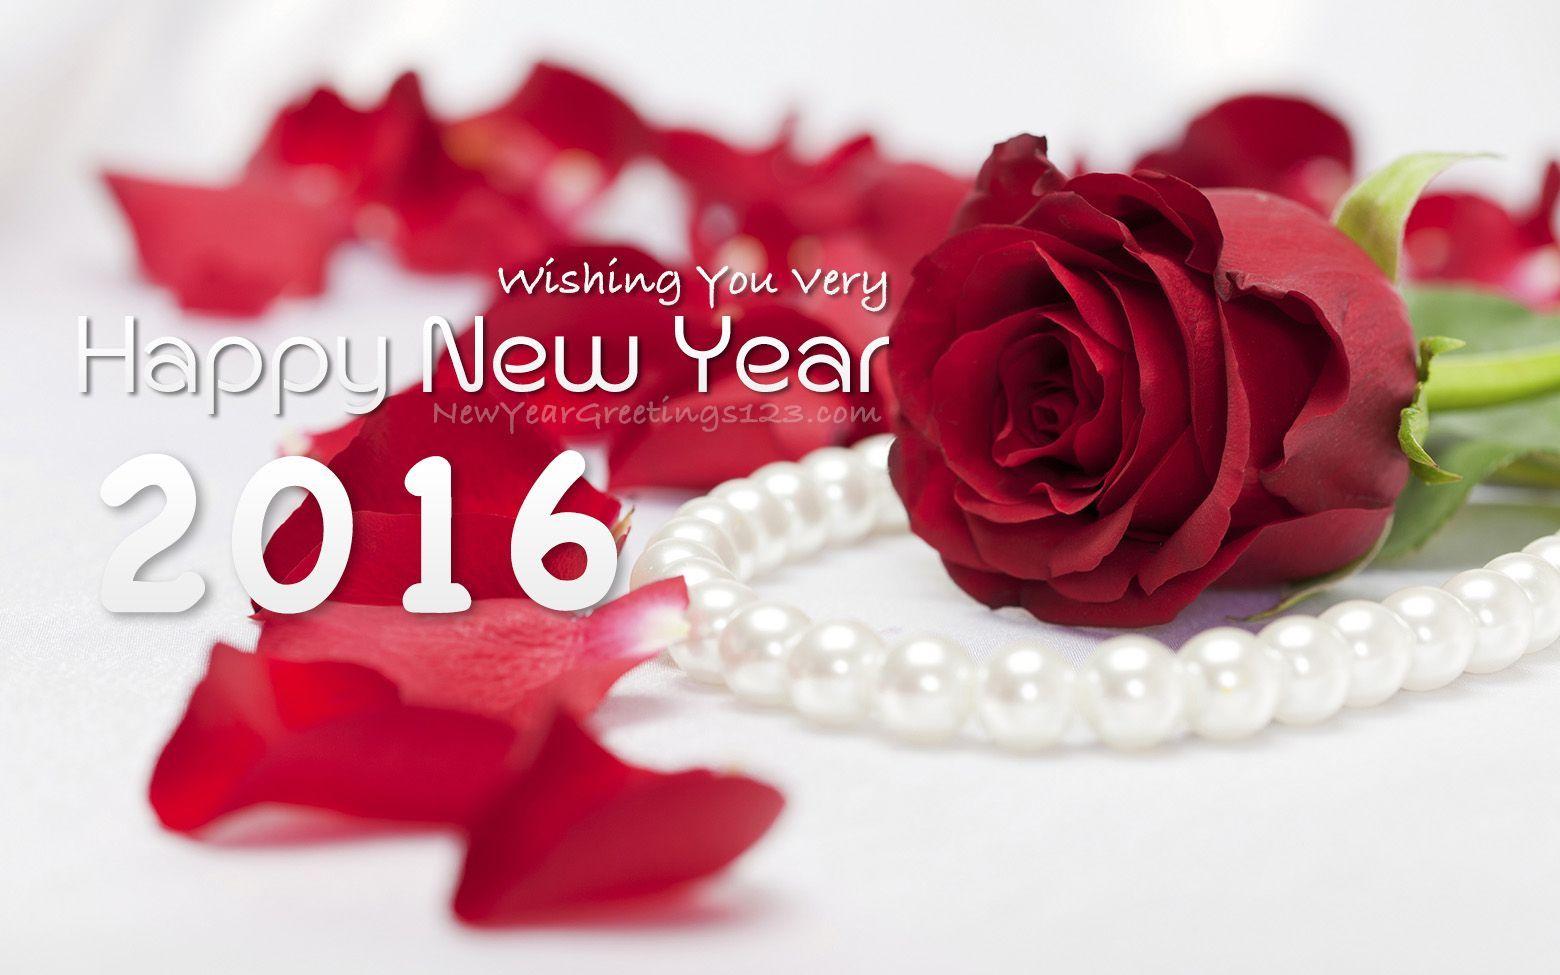 Happy New Year 2016 Wallpaper for Facebook. Happy New Year 2017